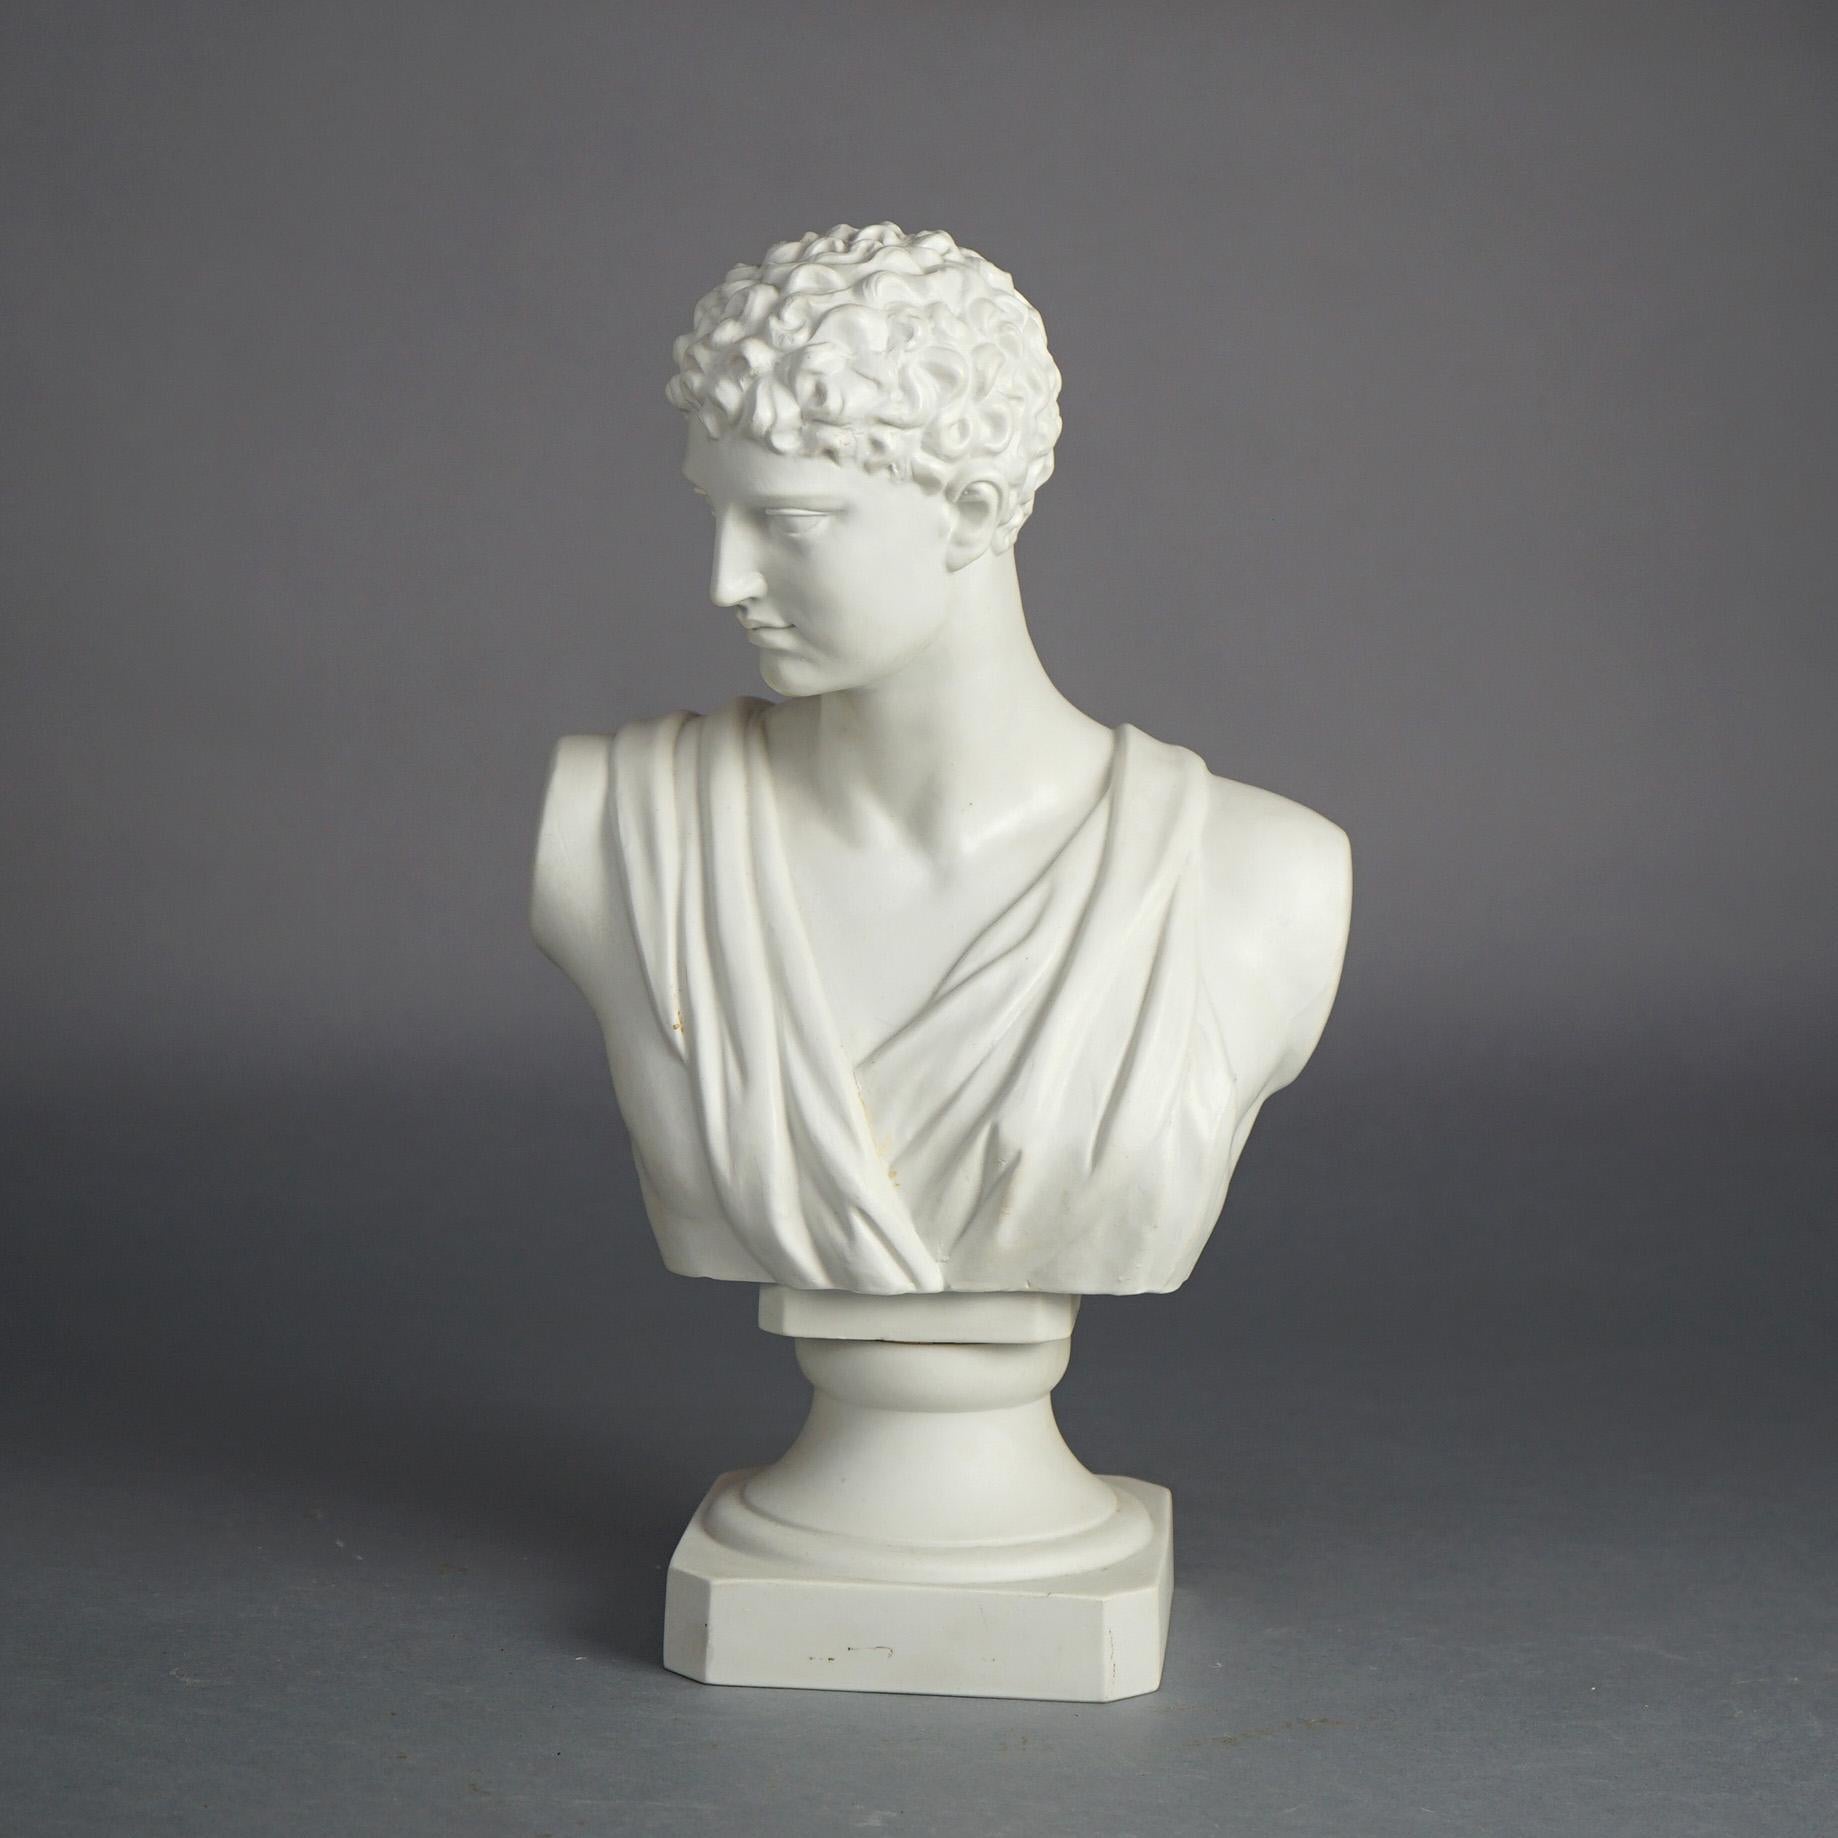 20th Century Antique French Neoclassical Parian Porcelain Bust of Michaelangelo's David C1900 For Sale